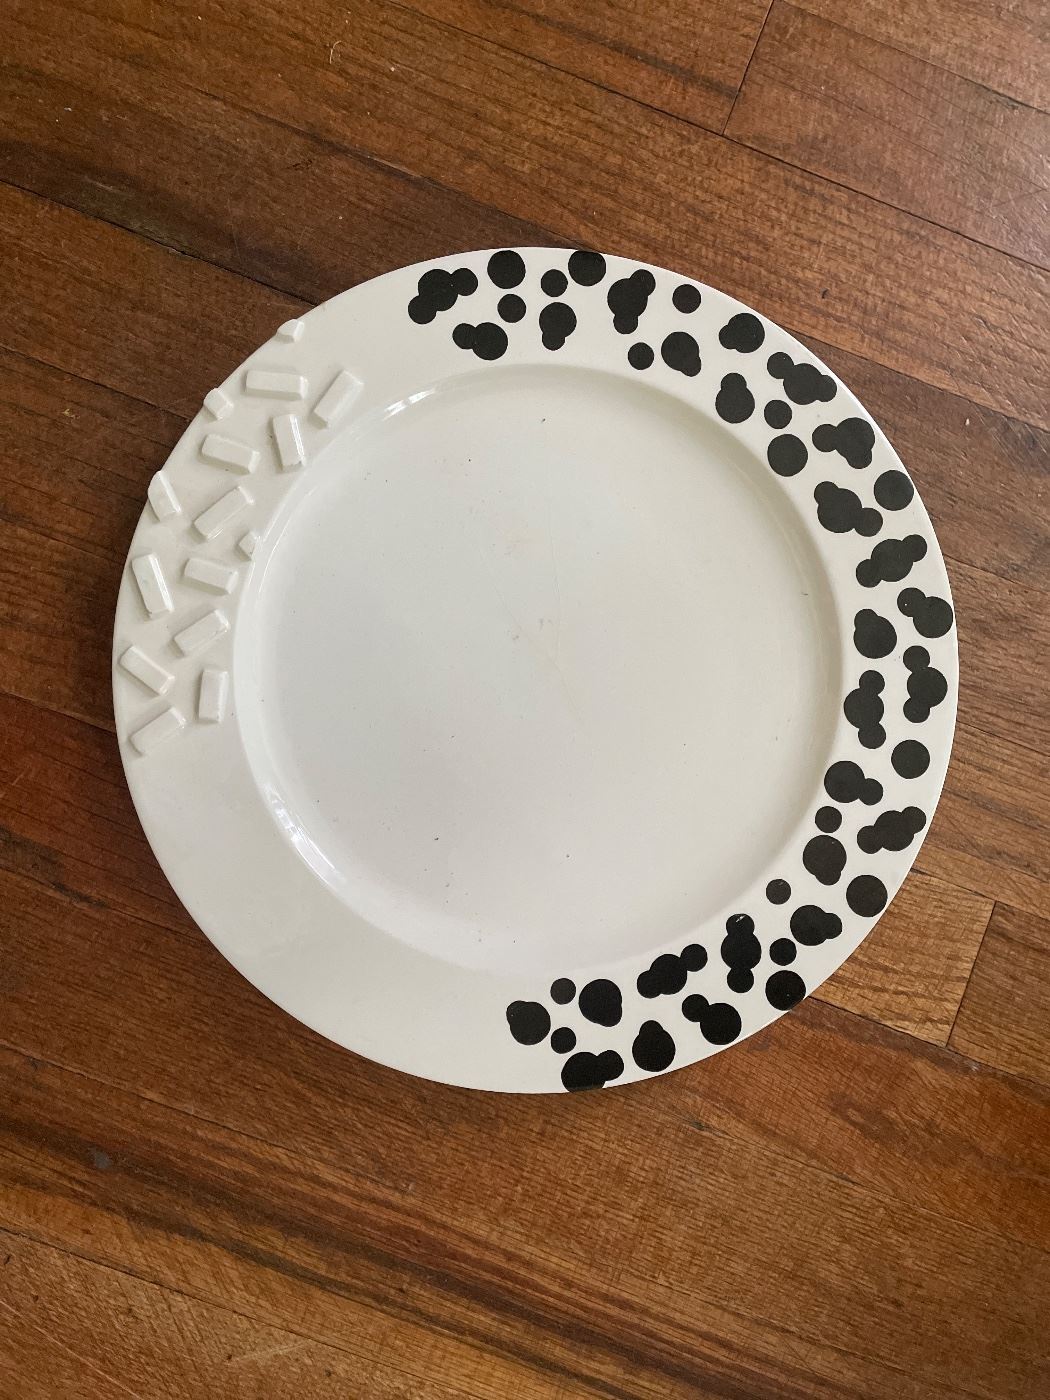 Ettore Sottsass plate Memphis Milano for Bloomingdale’s 